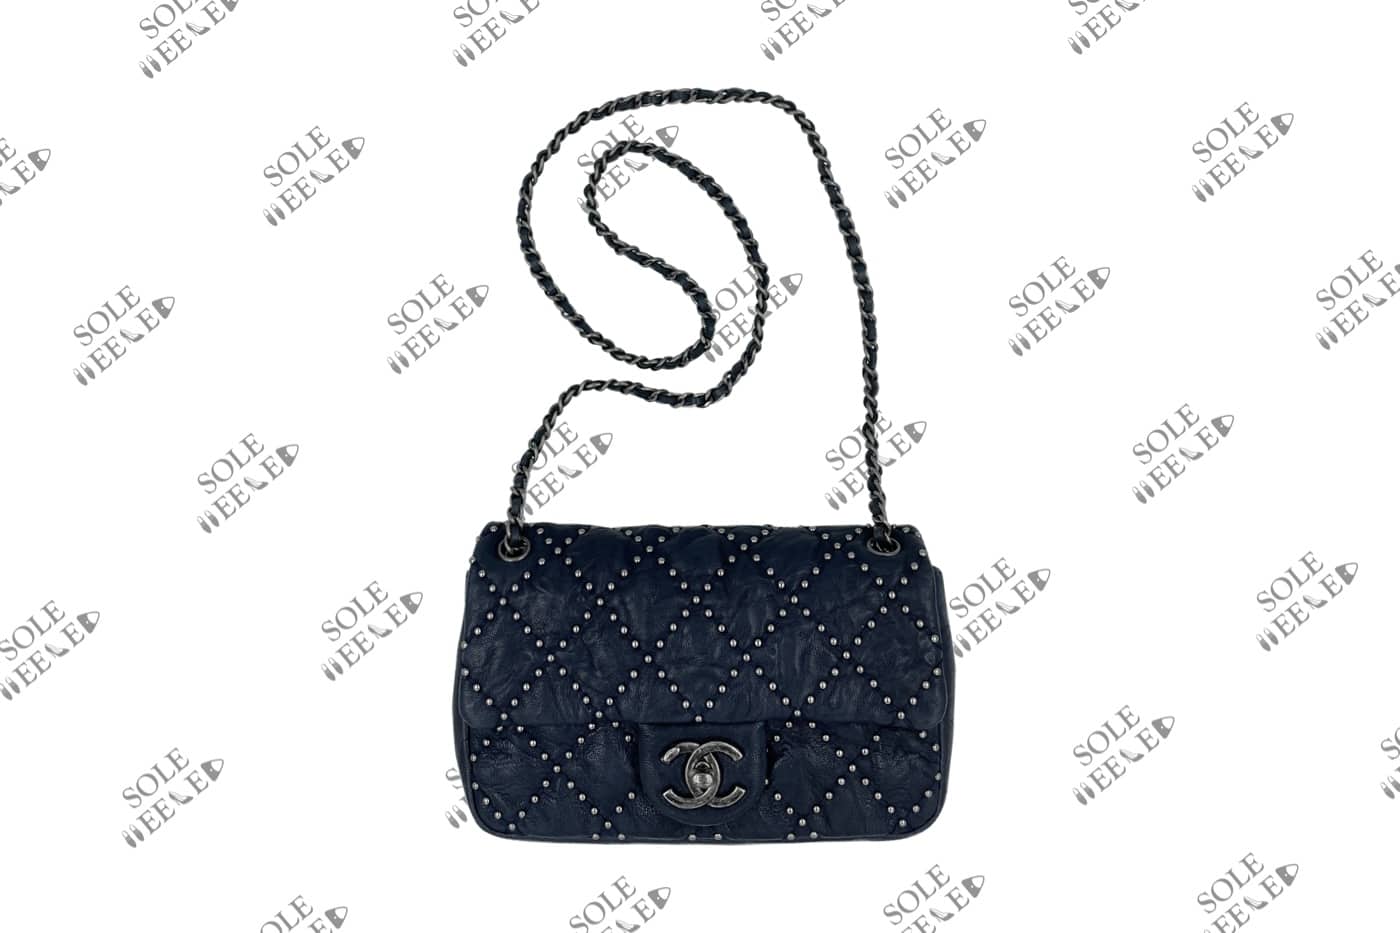 chanel bag chain replacement strap